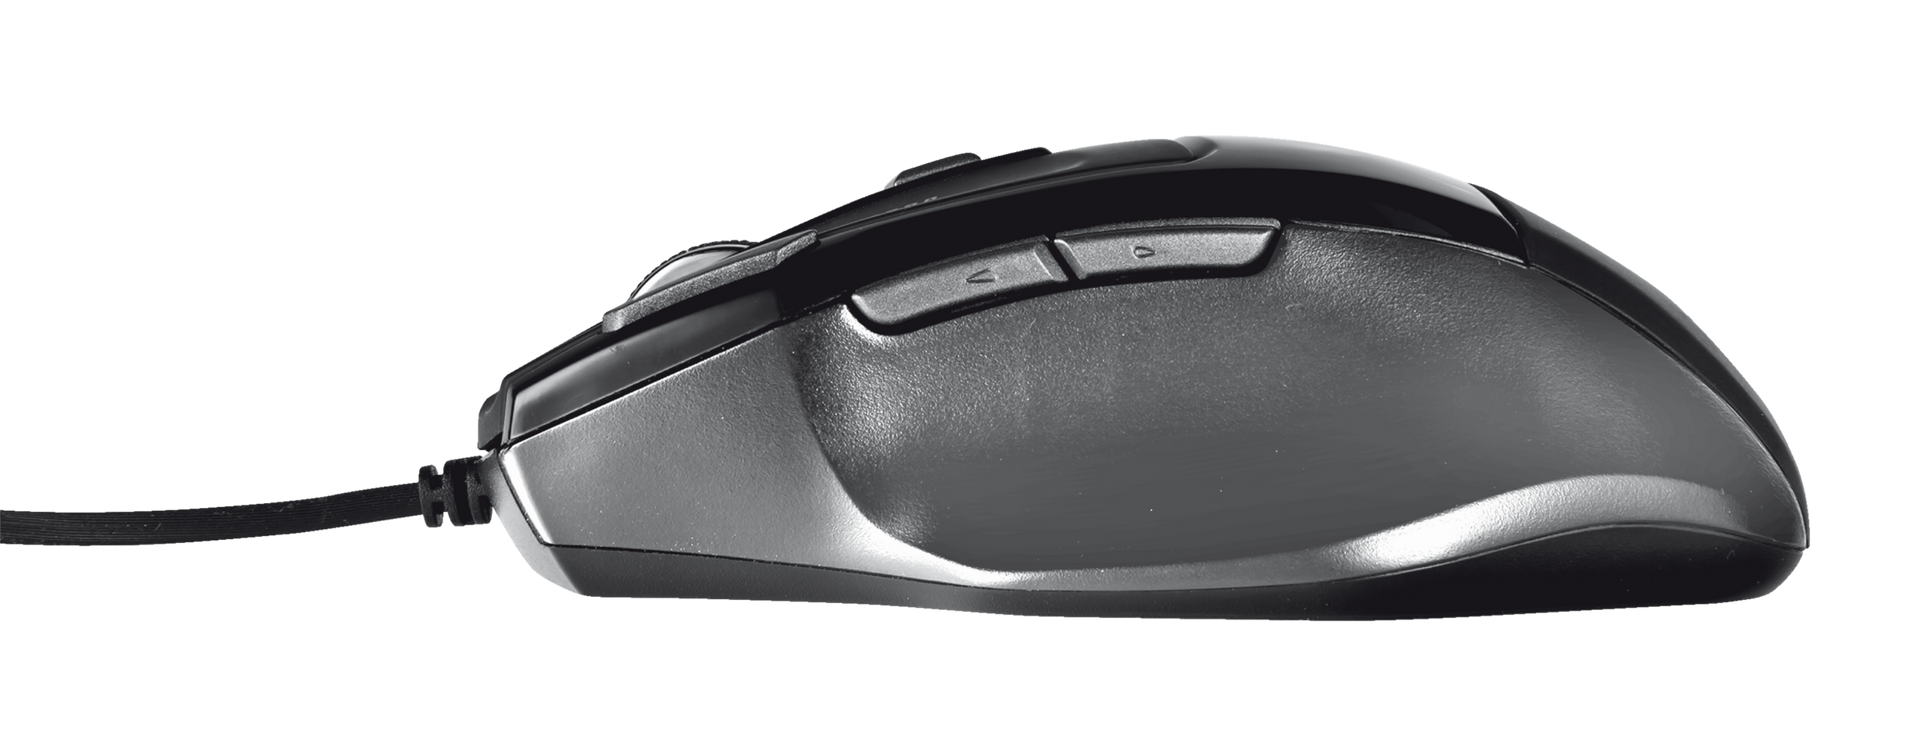 GXT 25 Gaming Mouse-Side